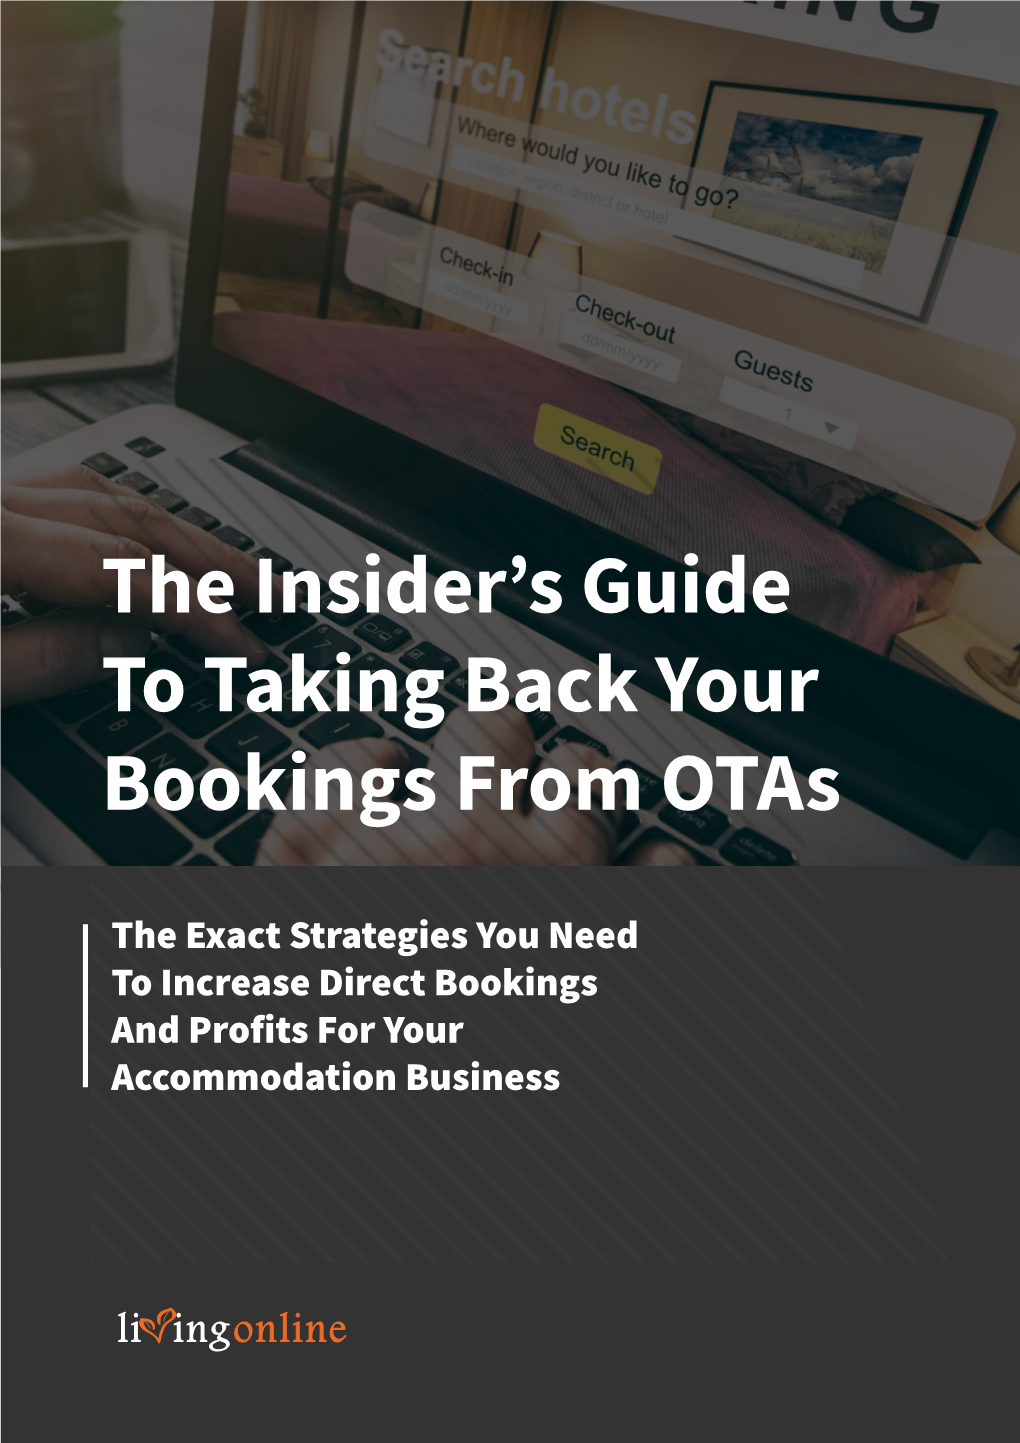 The Insider's Guide to Taking Back Your Bookings from Otas